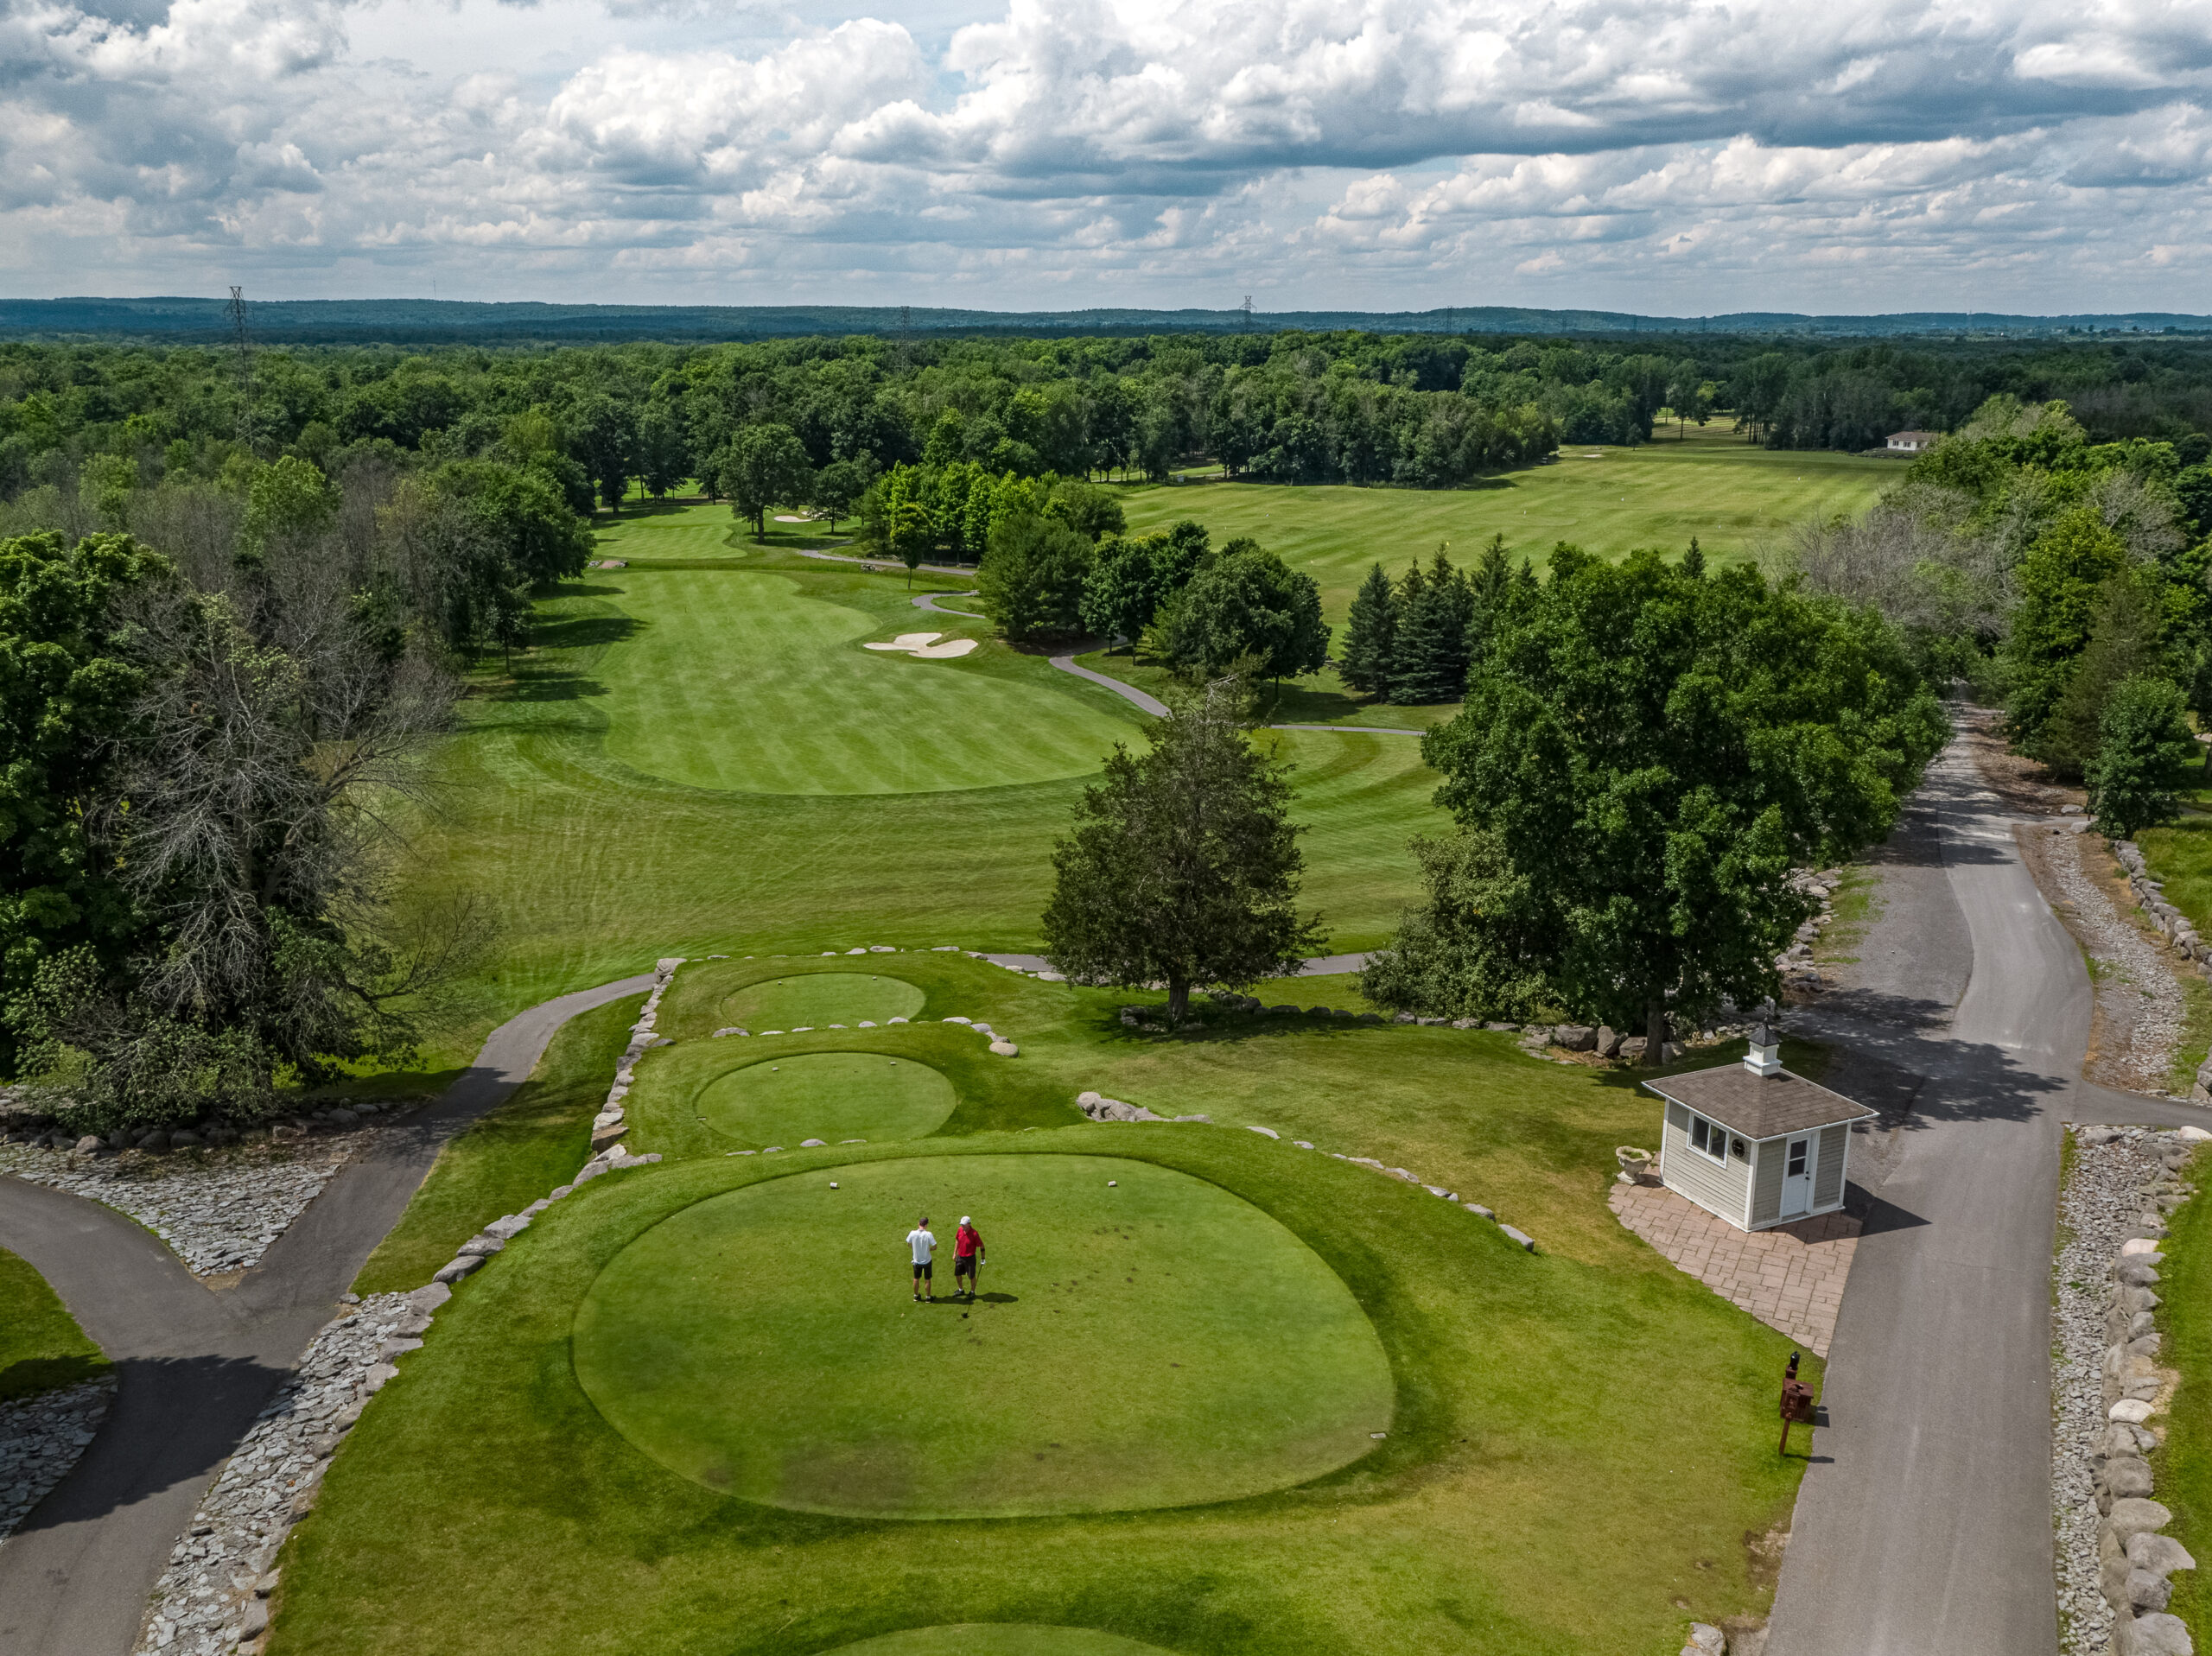 aerial view of a golf course with wooded areas around the green